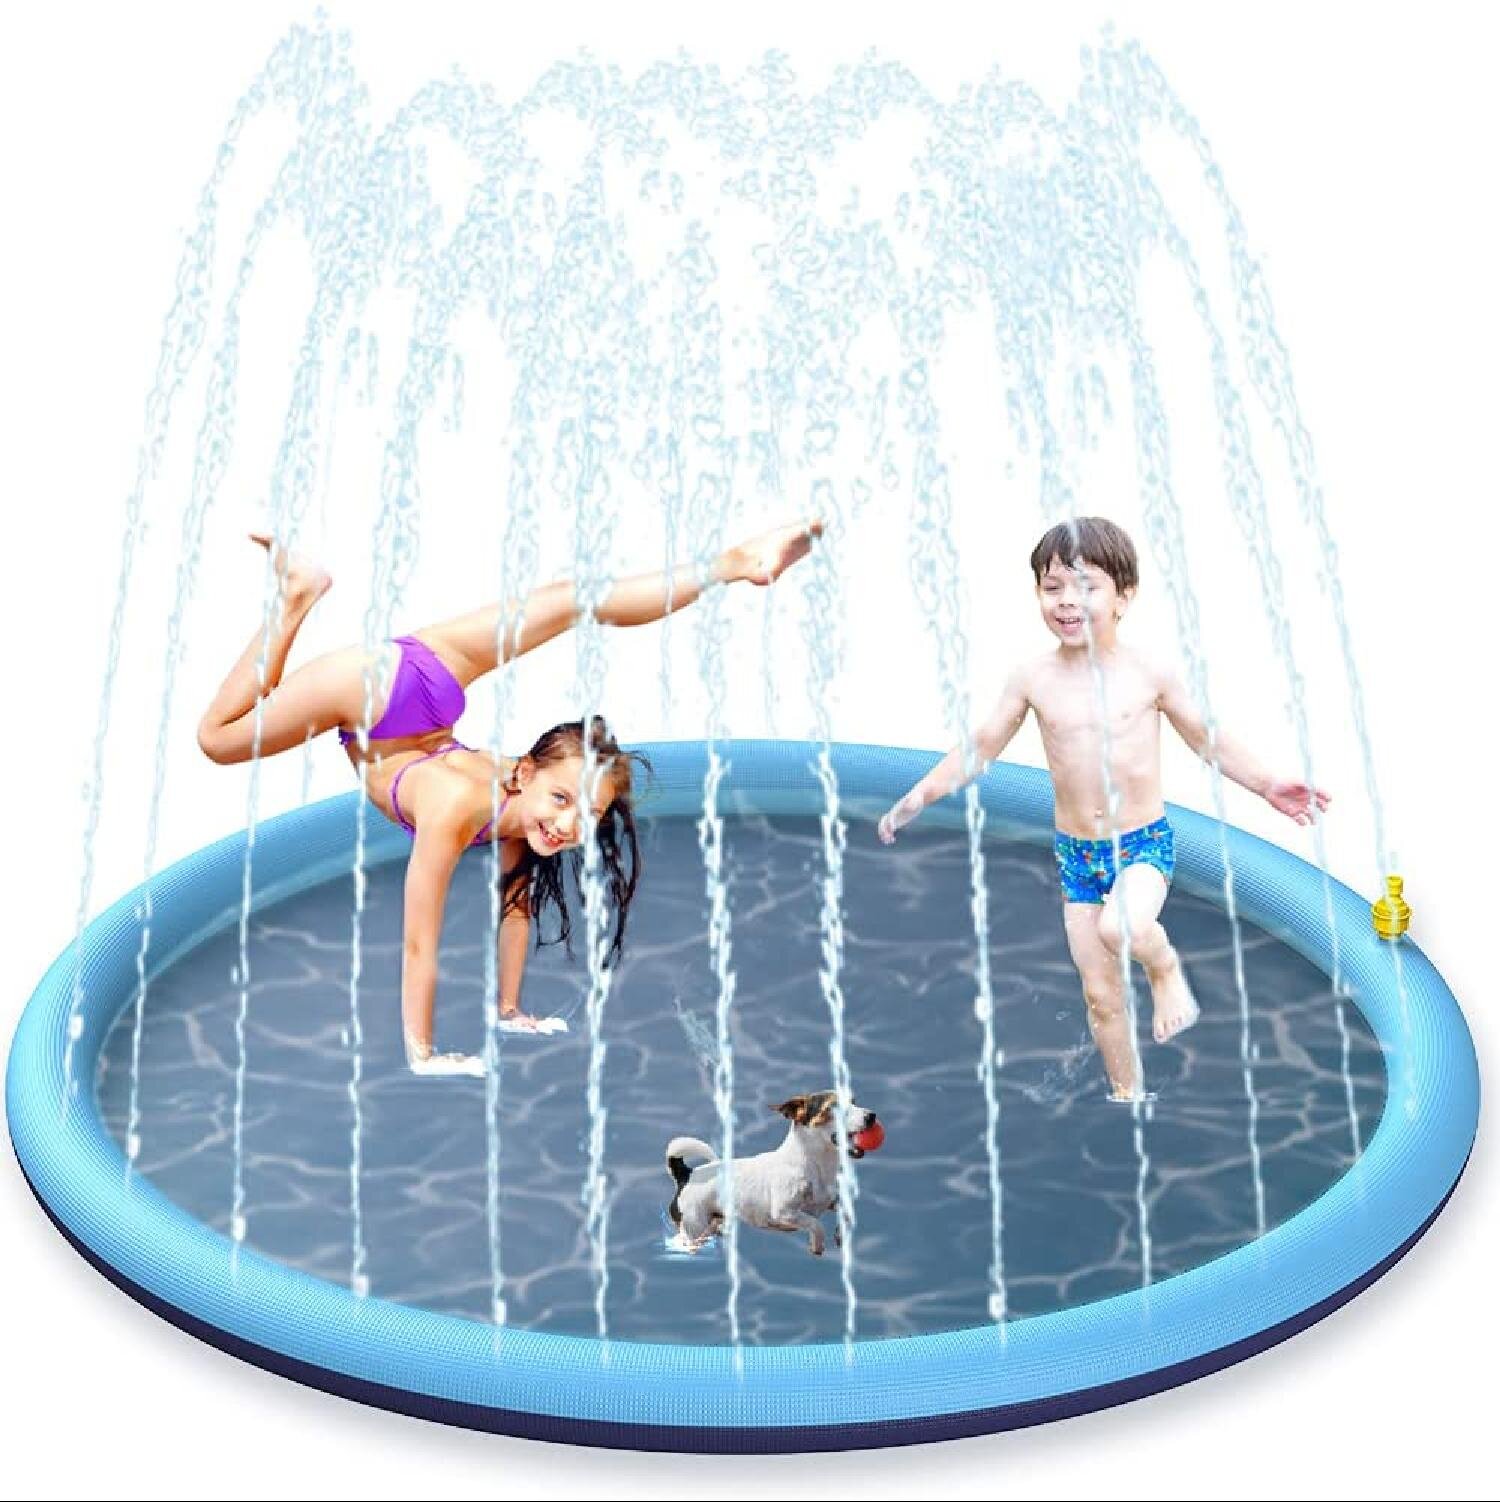 83 x 52 x 14 GMWD Inflatable Play Pool with Slide Sprinkler Water Toys for Kids Toddler and Summer Water Party 